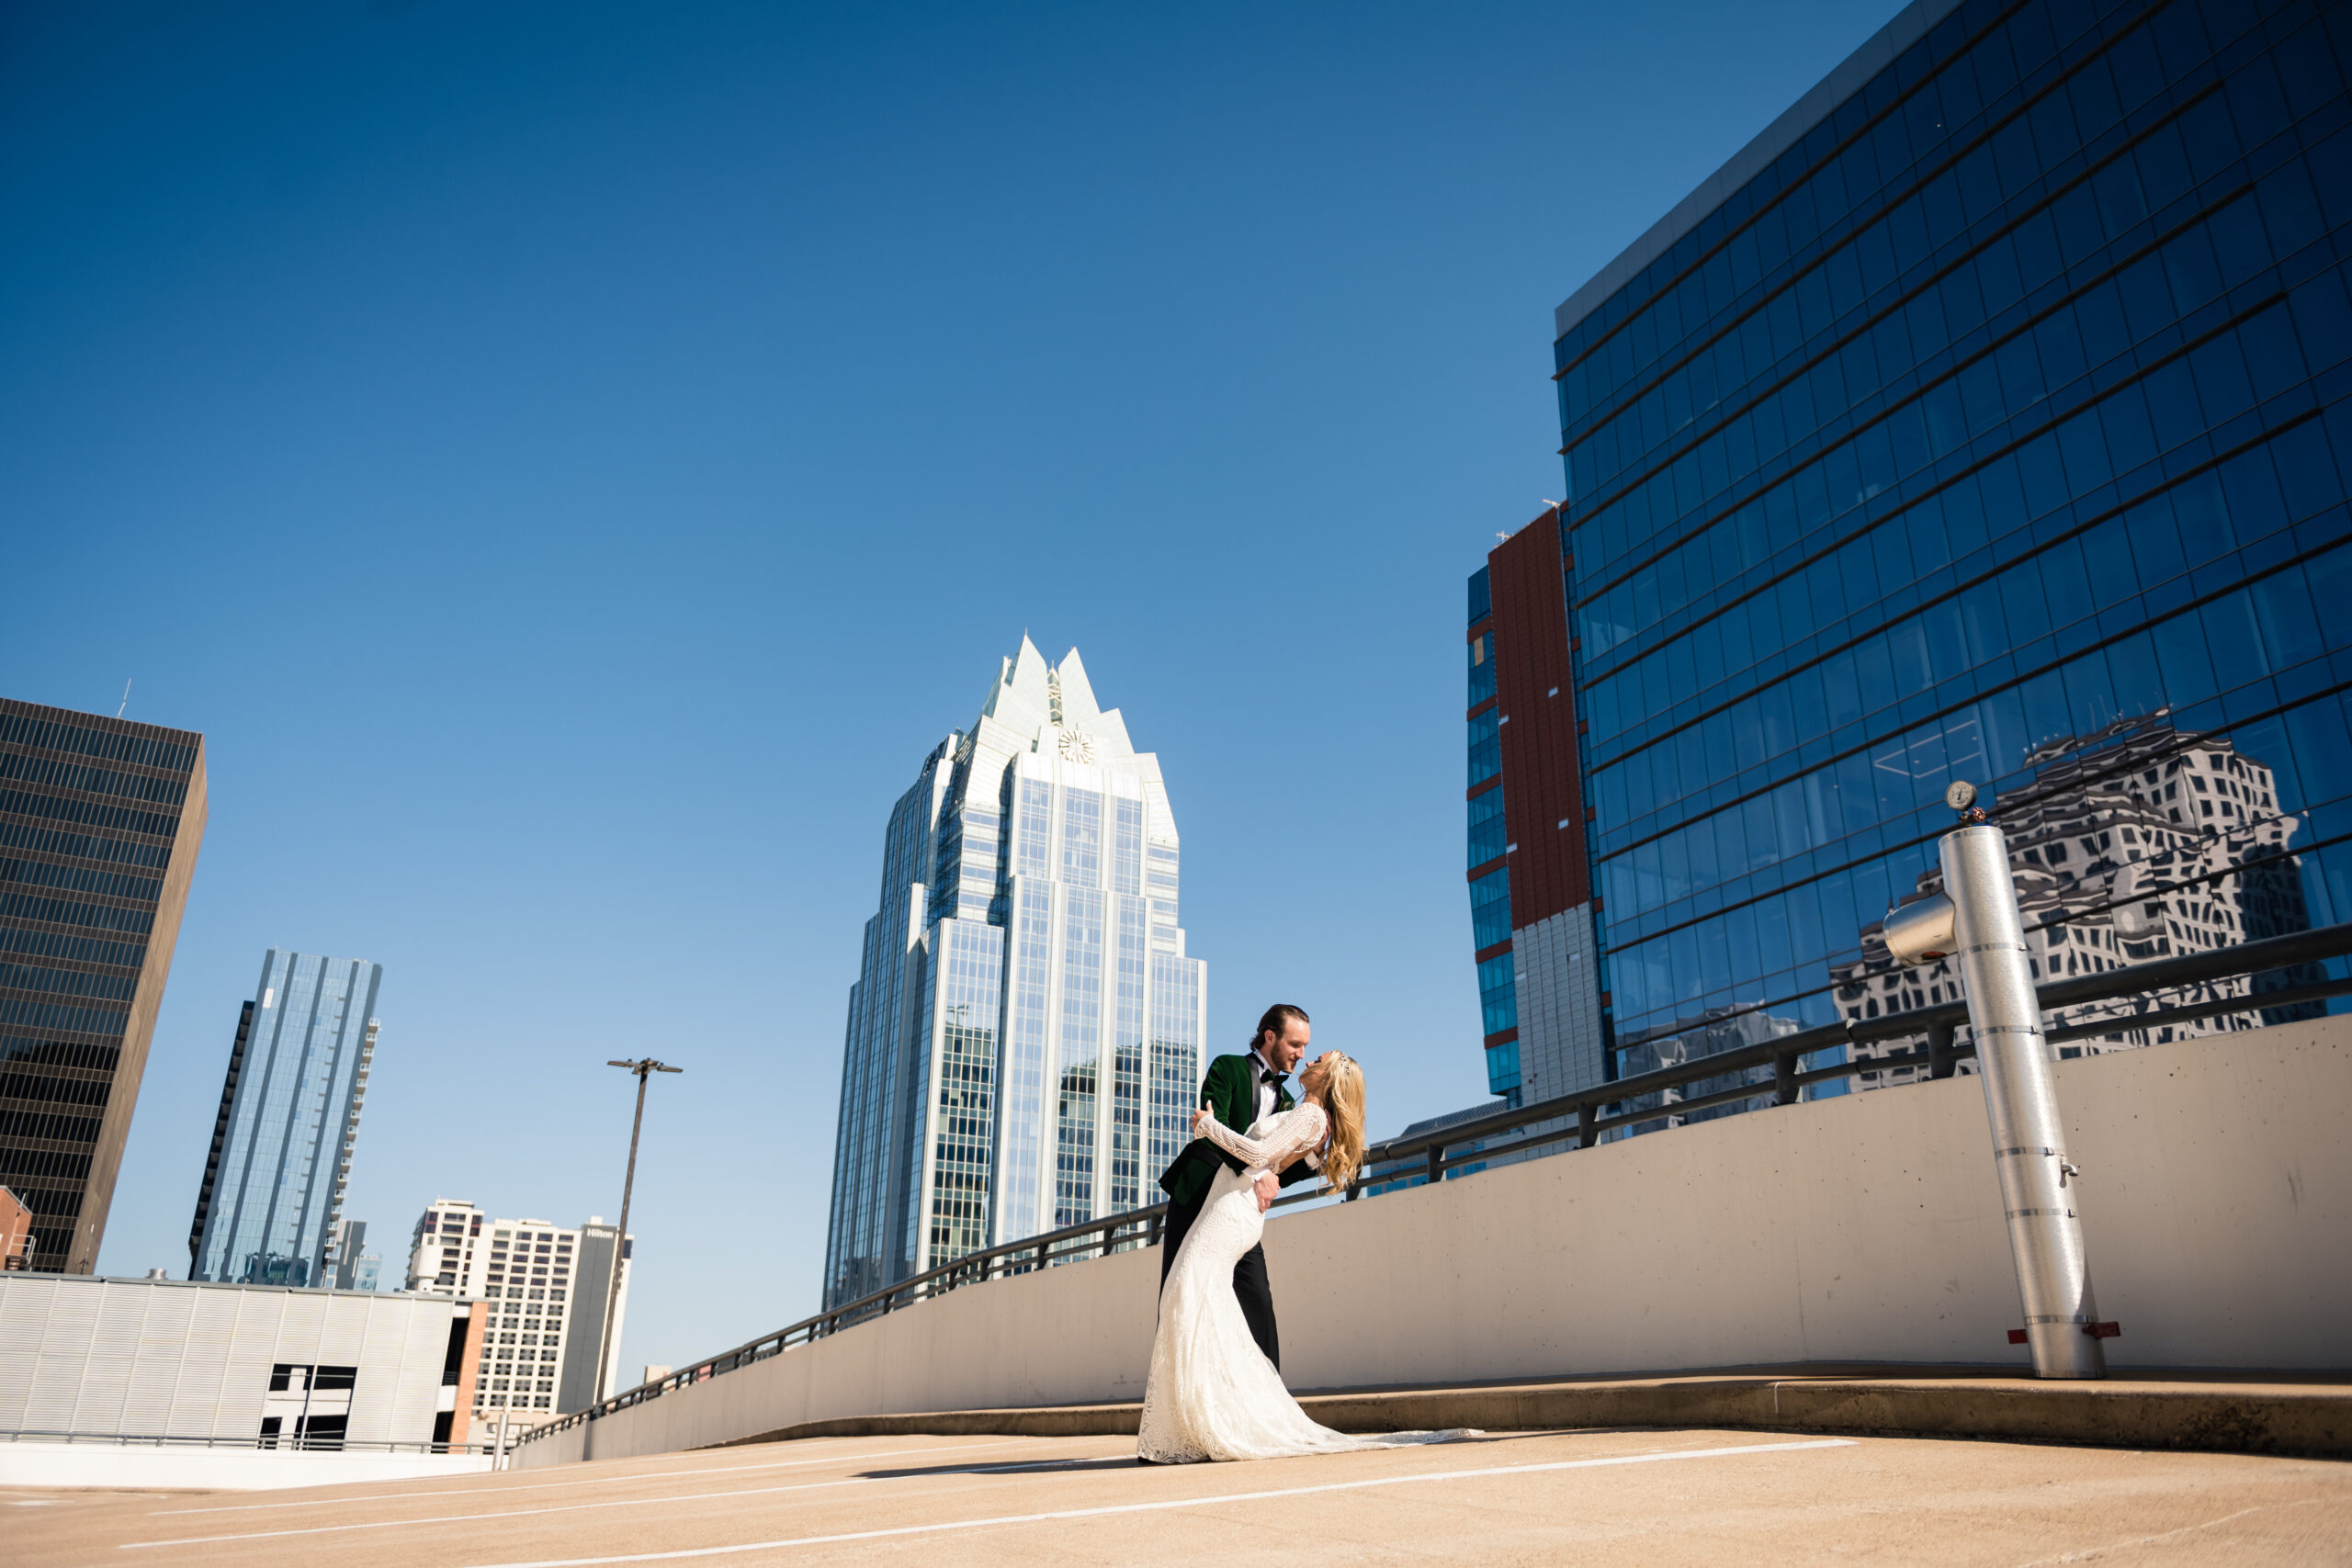 A groom wearing a green velvet suit dips his bride while kissing her. Austin, Texas skyline can be seen in the distance.